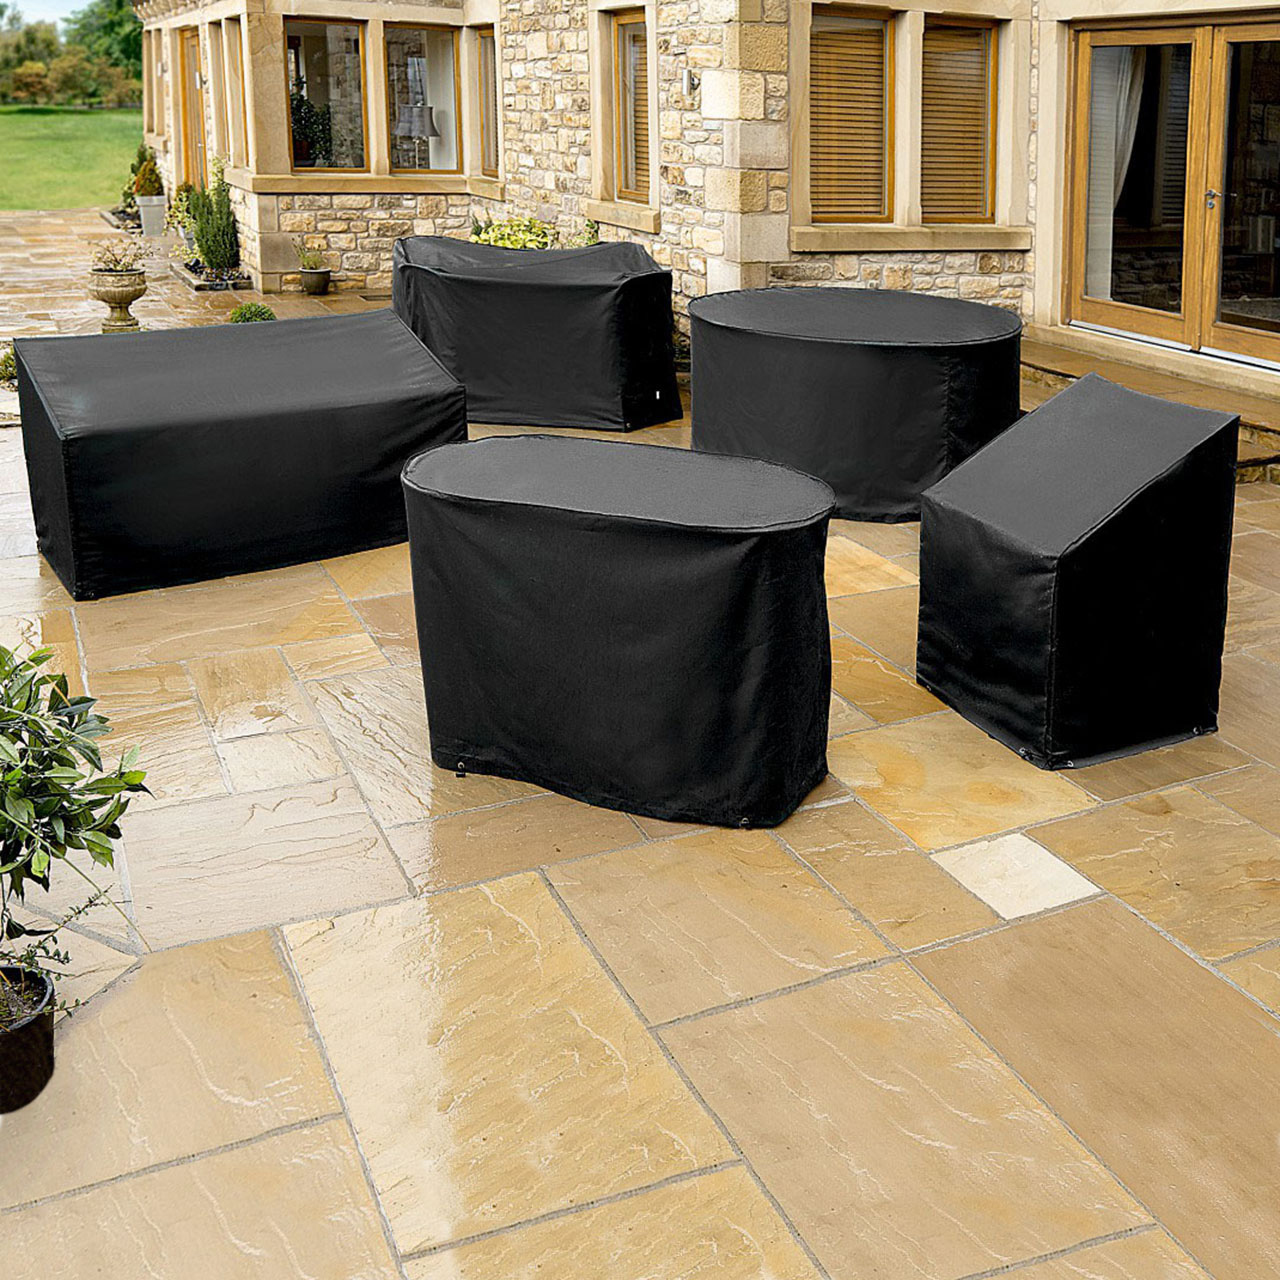 4-Seater Round Patio Set Cover